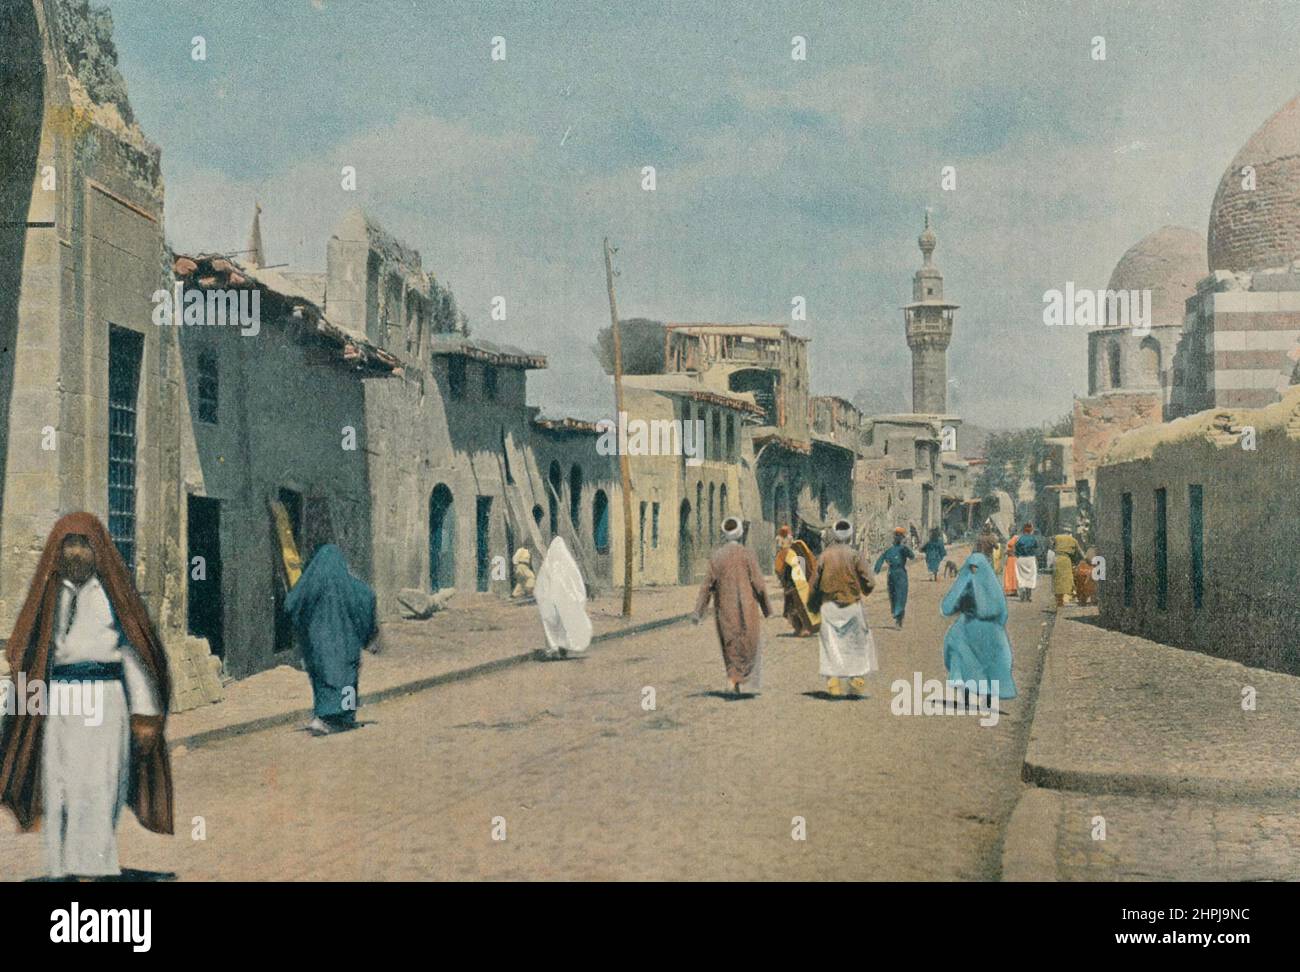 Damas Autour Du Monde Syrie 1895 - 1900  (8)  - 19 th century french colored photography print Stock Photo